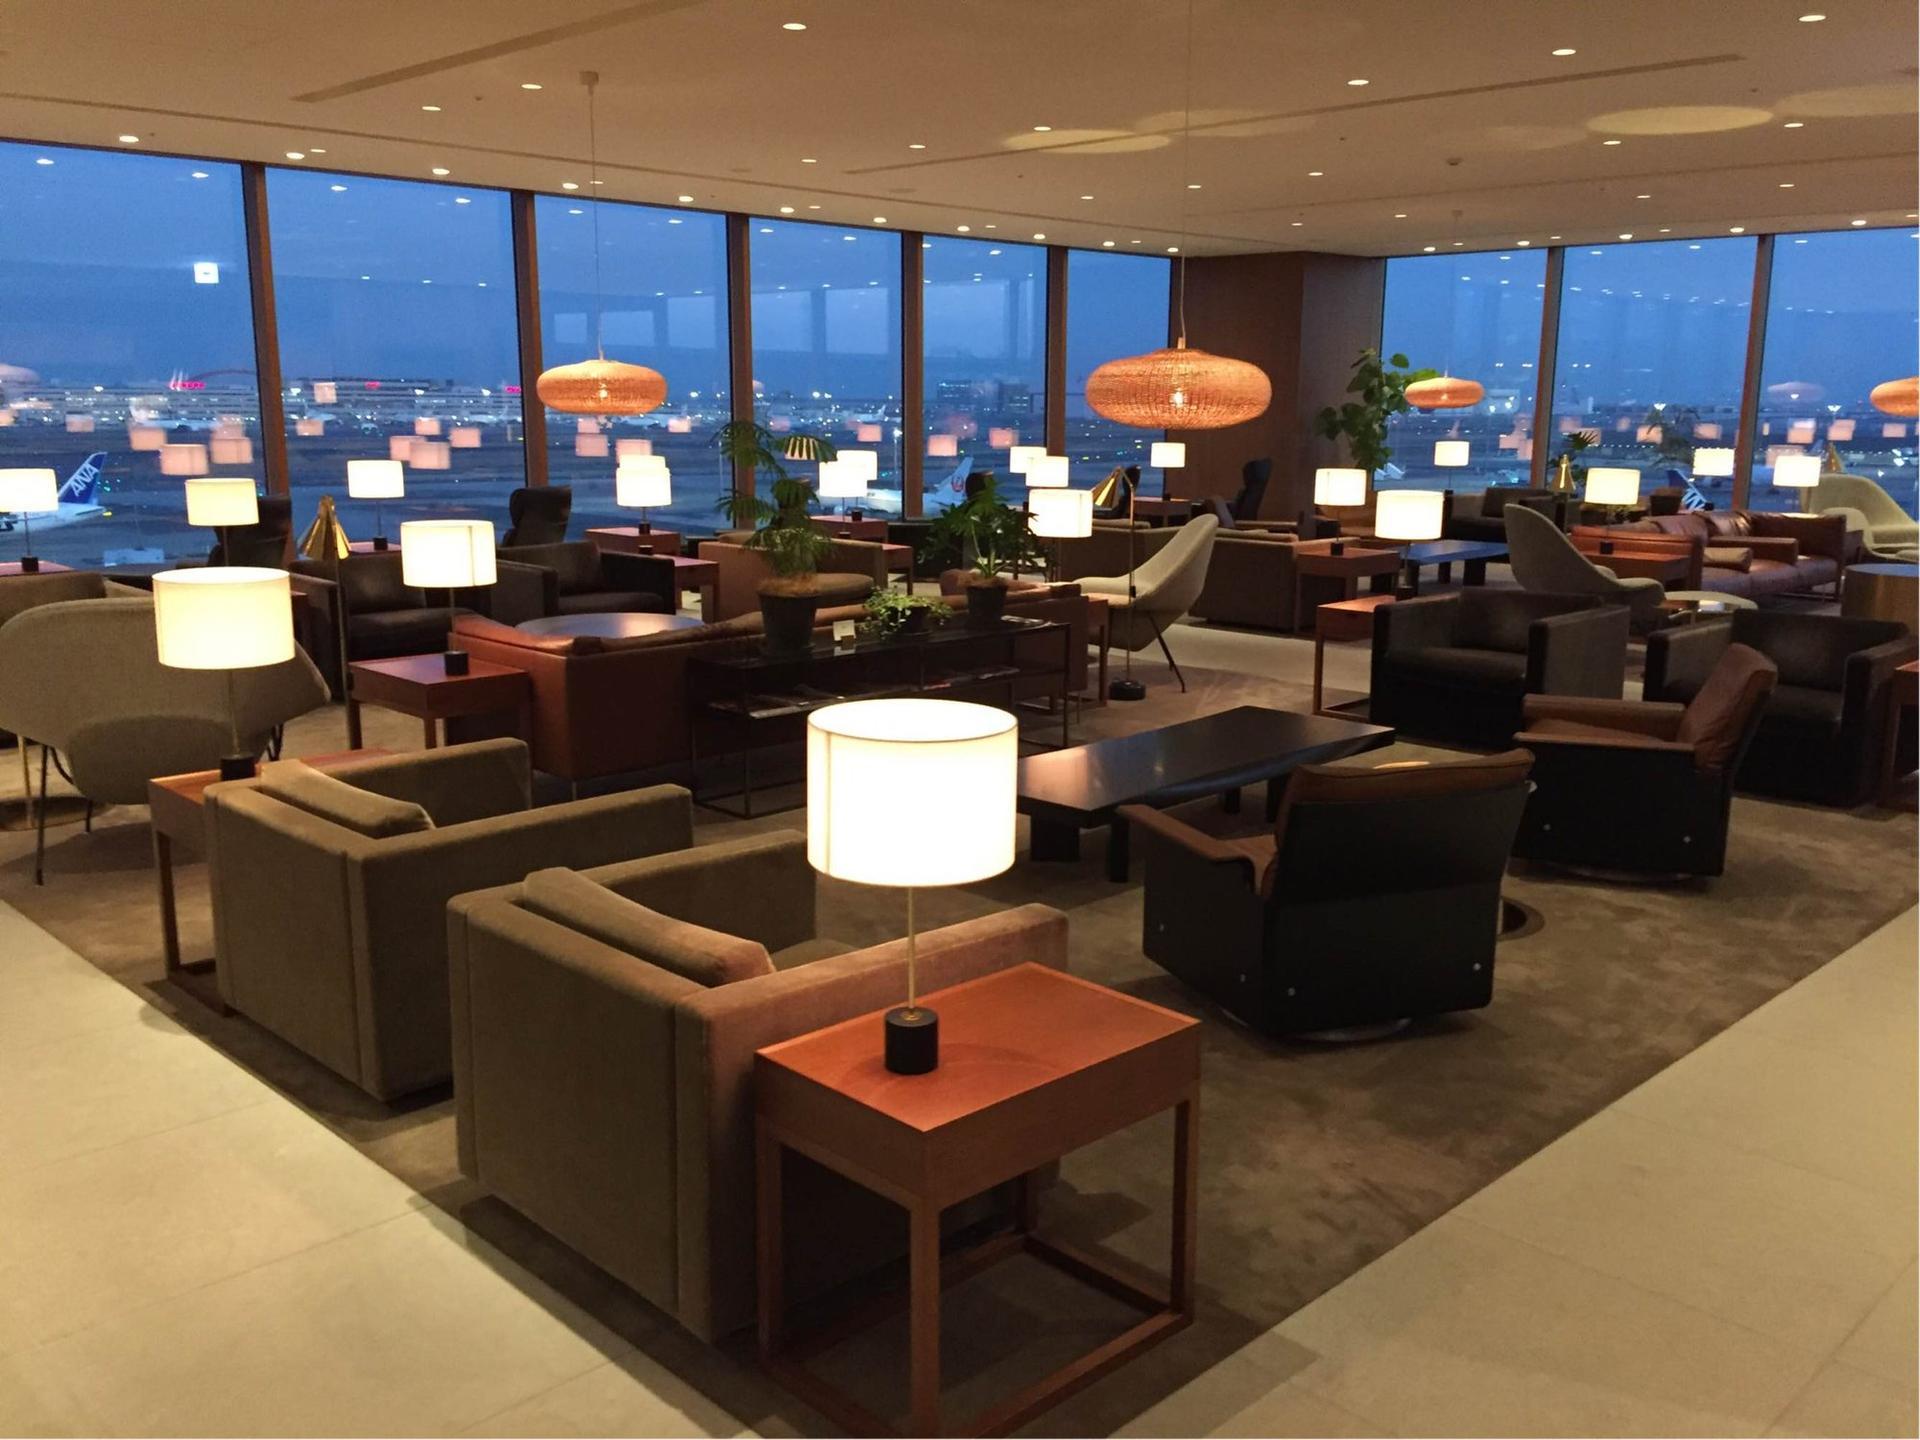 Cathay Pacific Lounge image 10 of 49